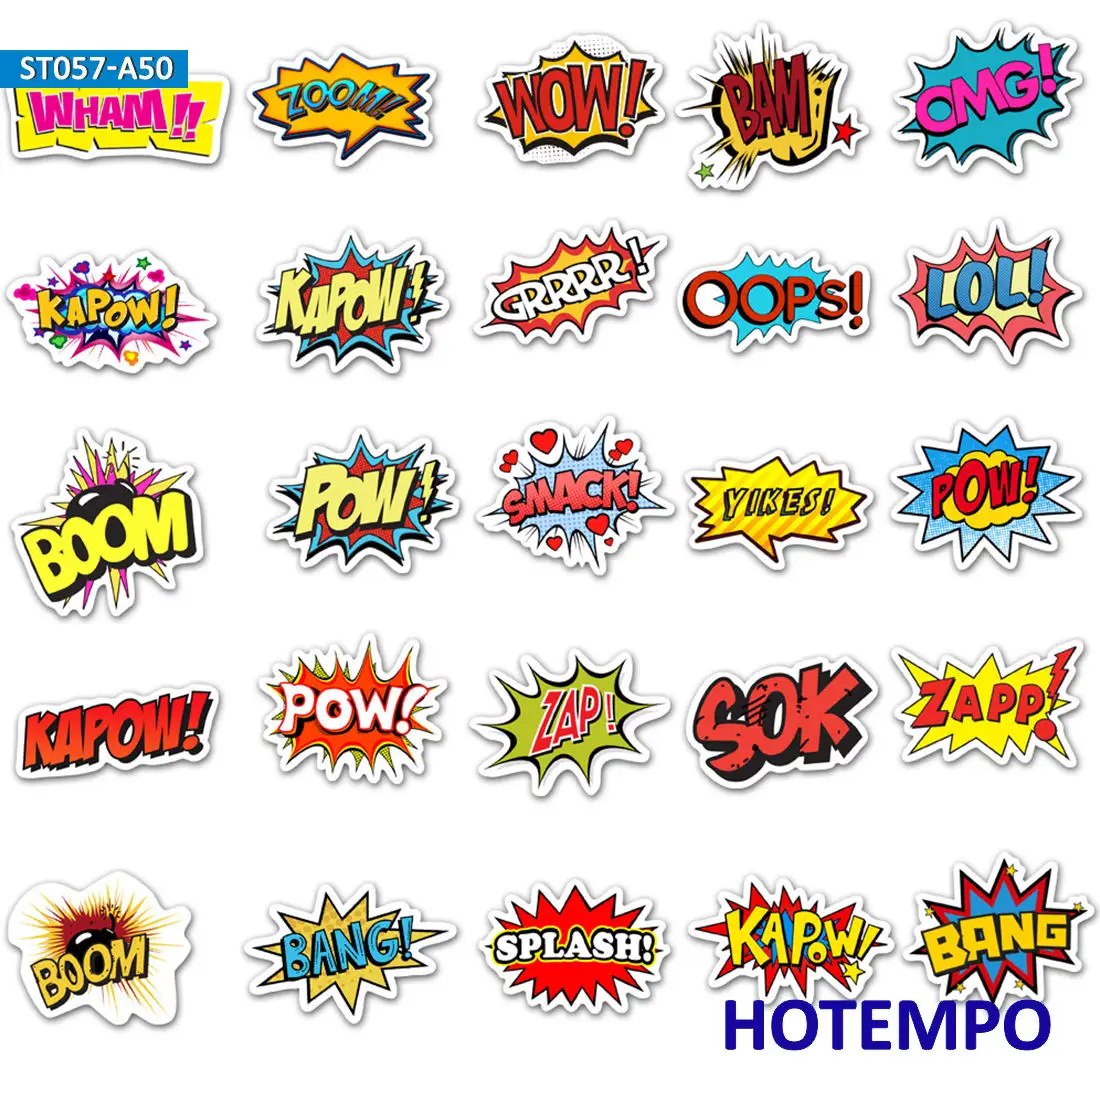 0pcs bam pow wow boom bang omg oop explosion cloud style anime slogan stickers pack for thumb200